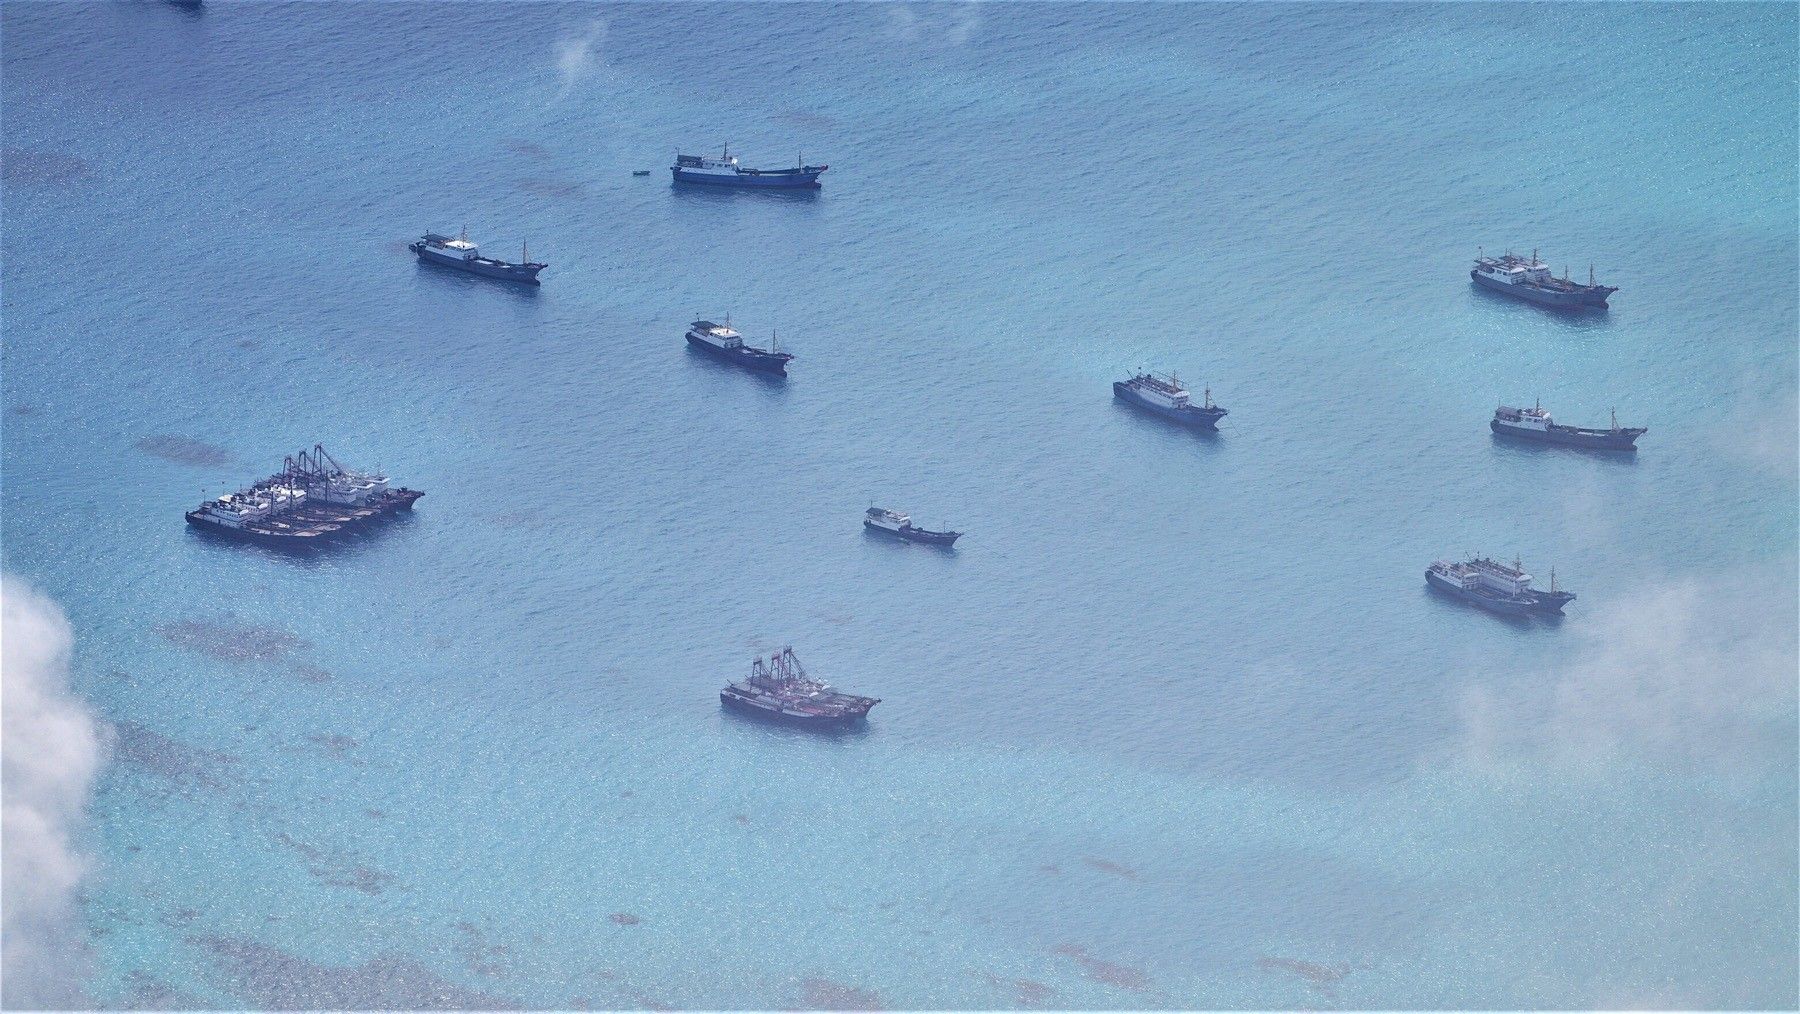 AFP reports swarming of more than 50 Chinese vessels in West Philippine Sea